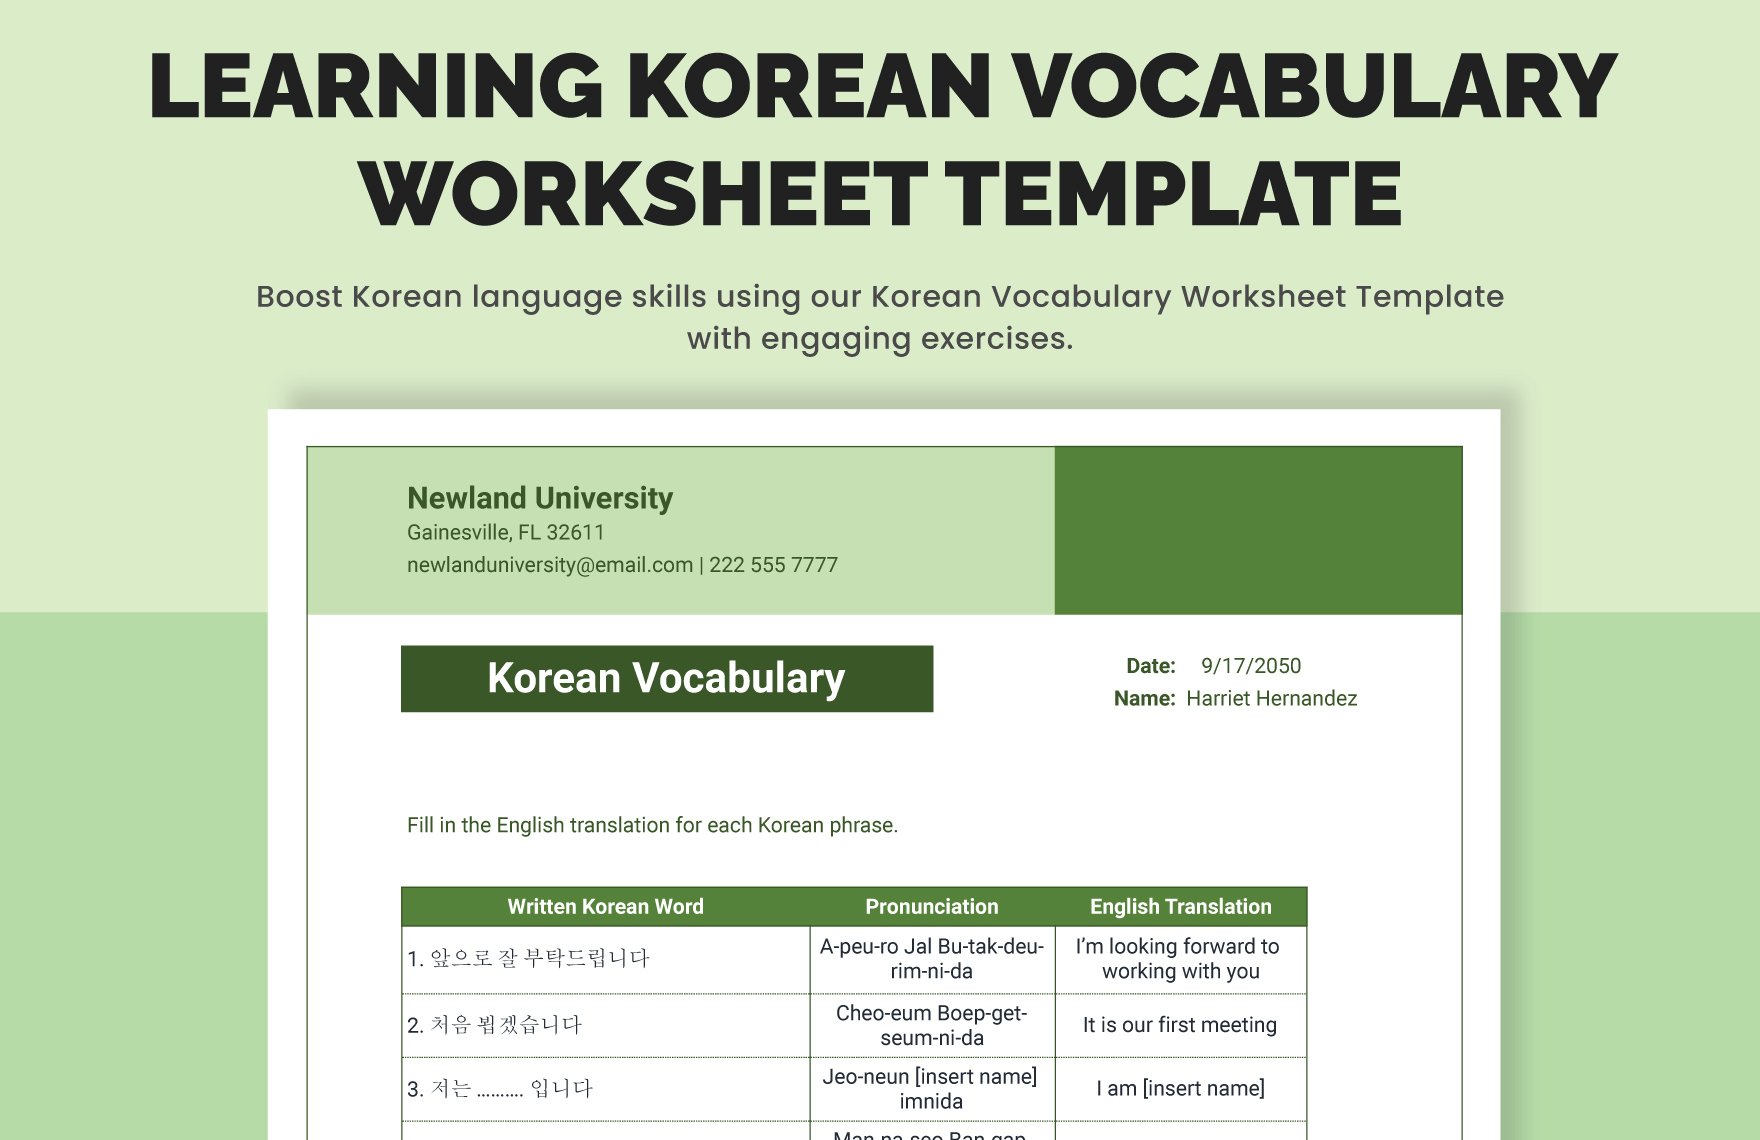 Learning Korean Vocabulary Worksheet Template in Excel, Google Sheets